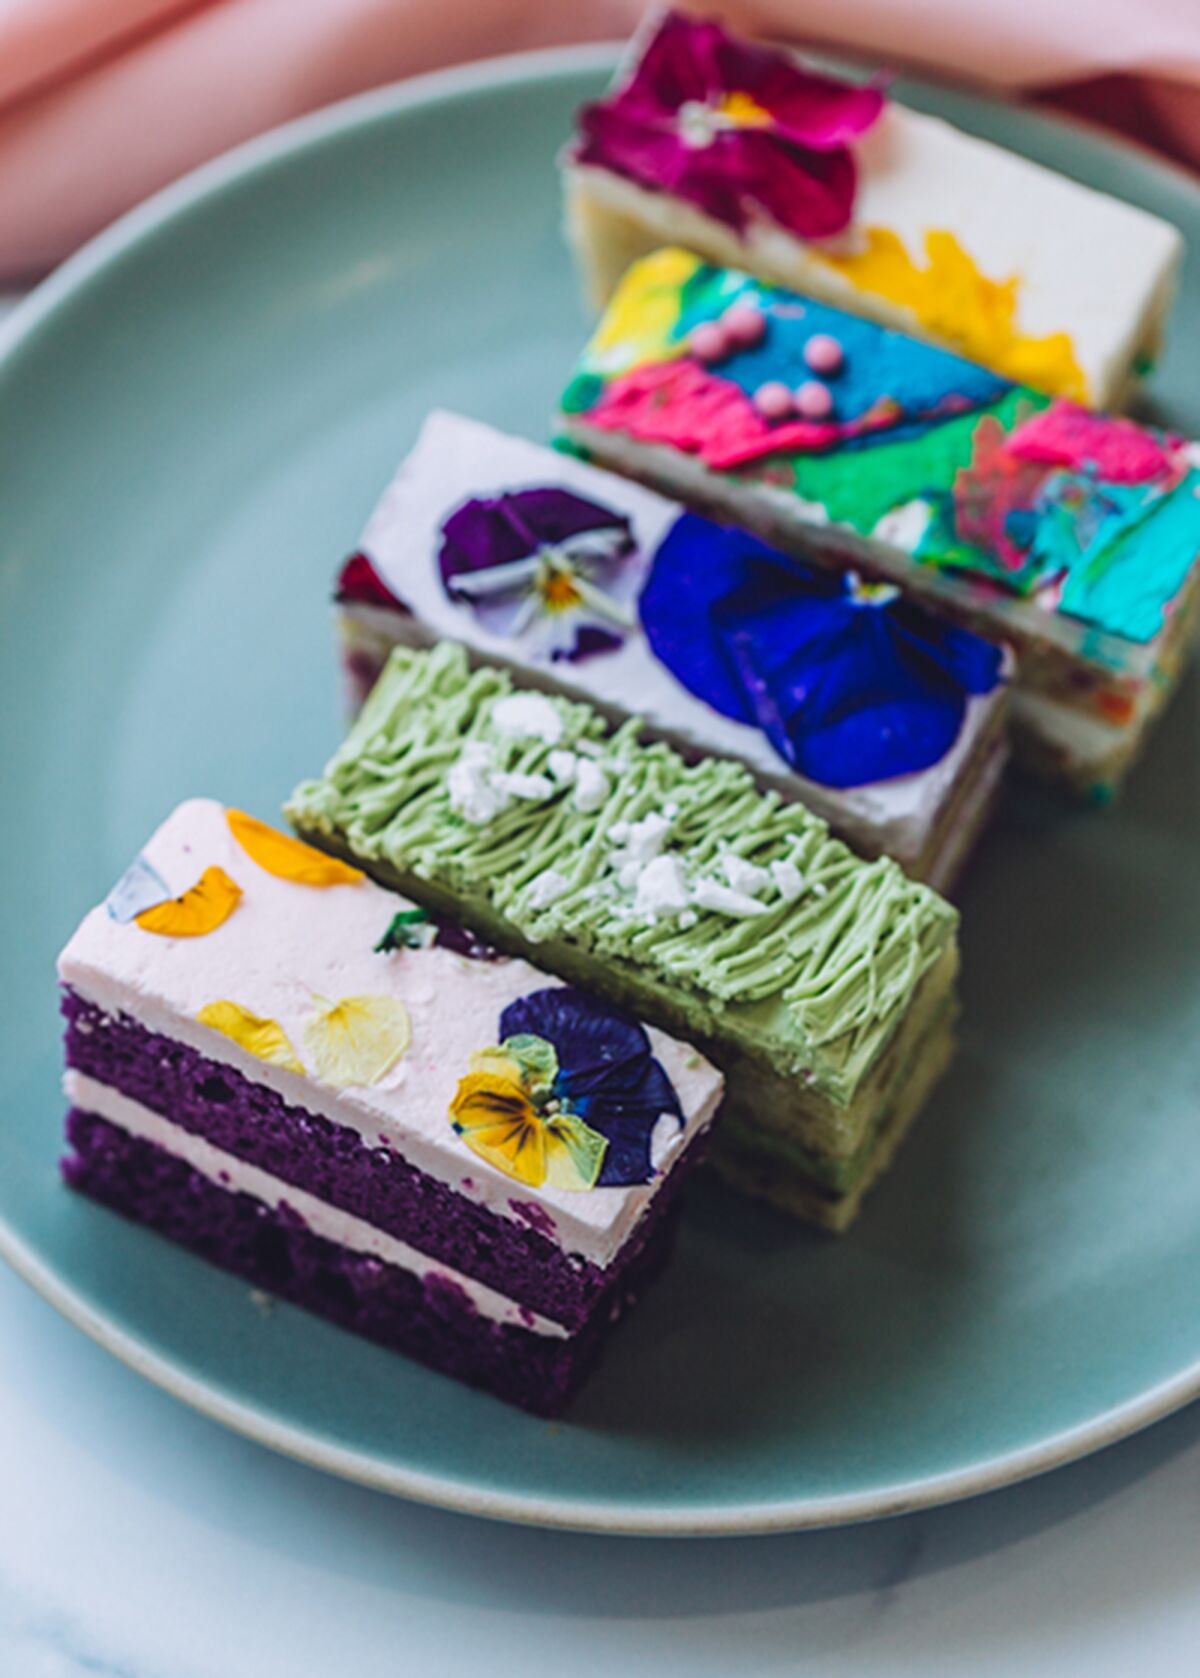 A vertical photo of colorful and flower-topped cake bars side by side on a plate.